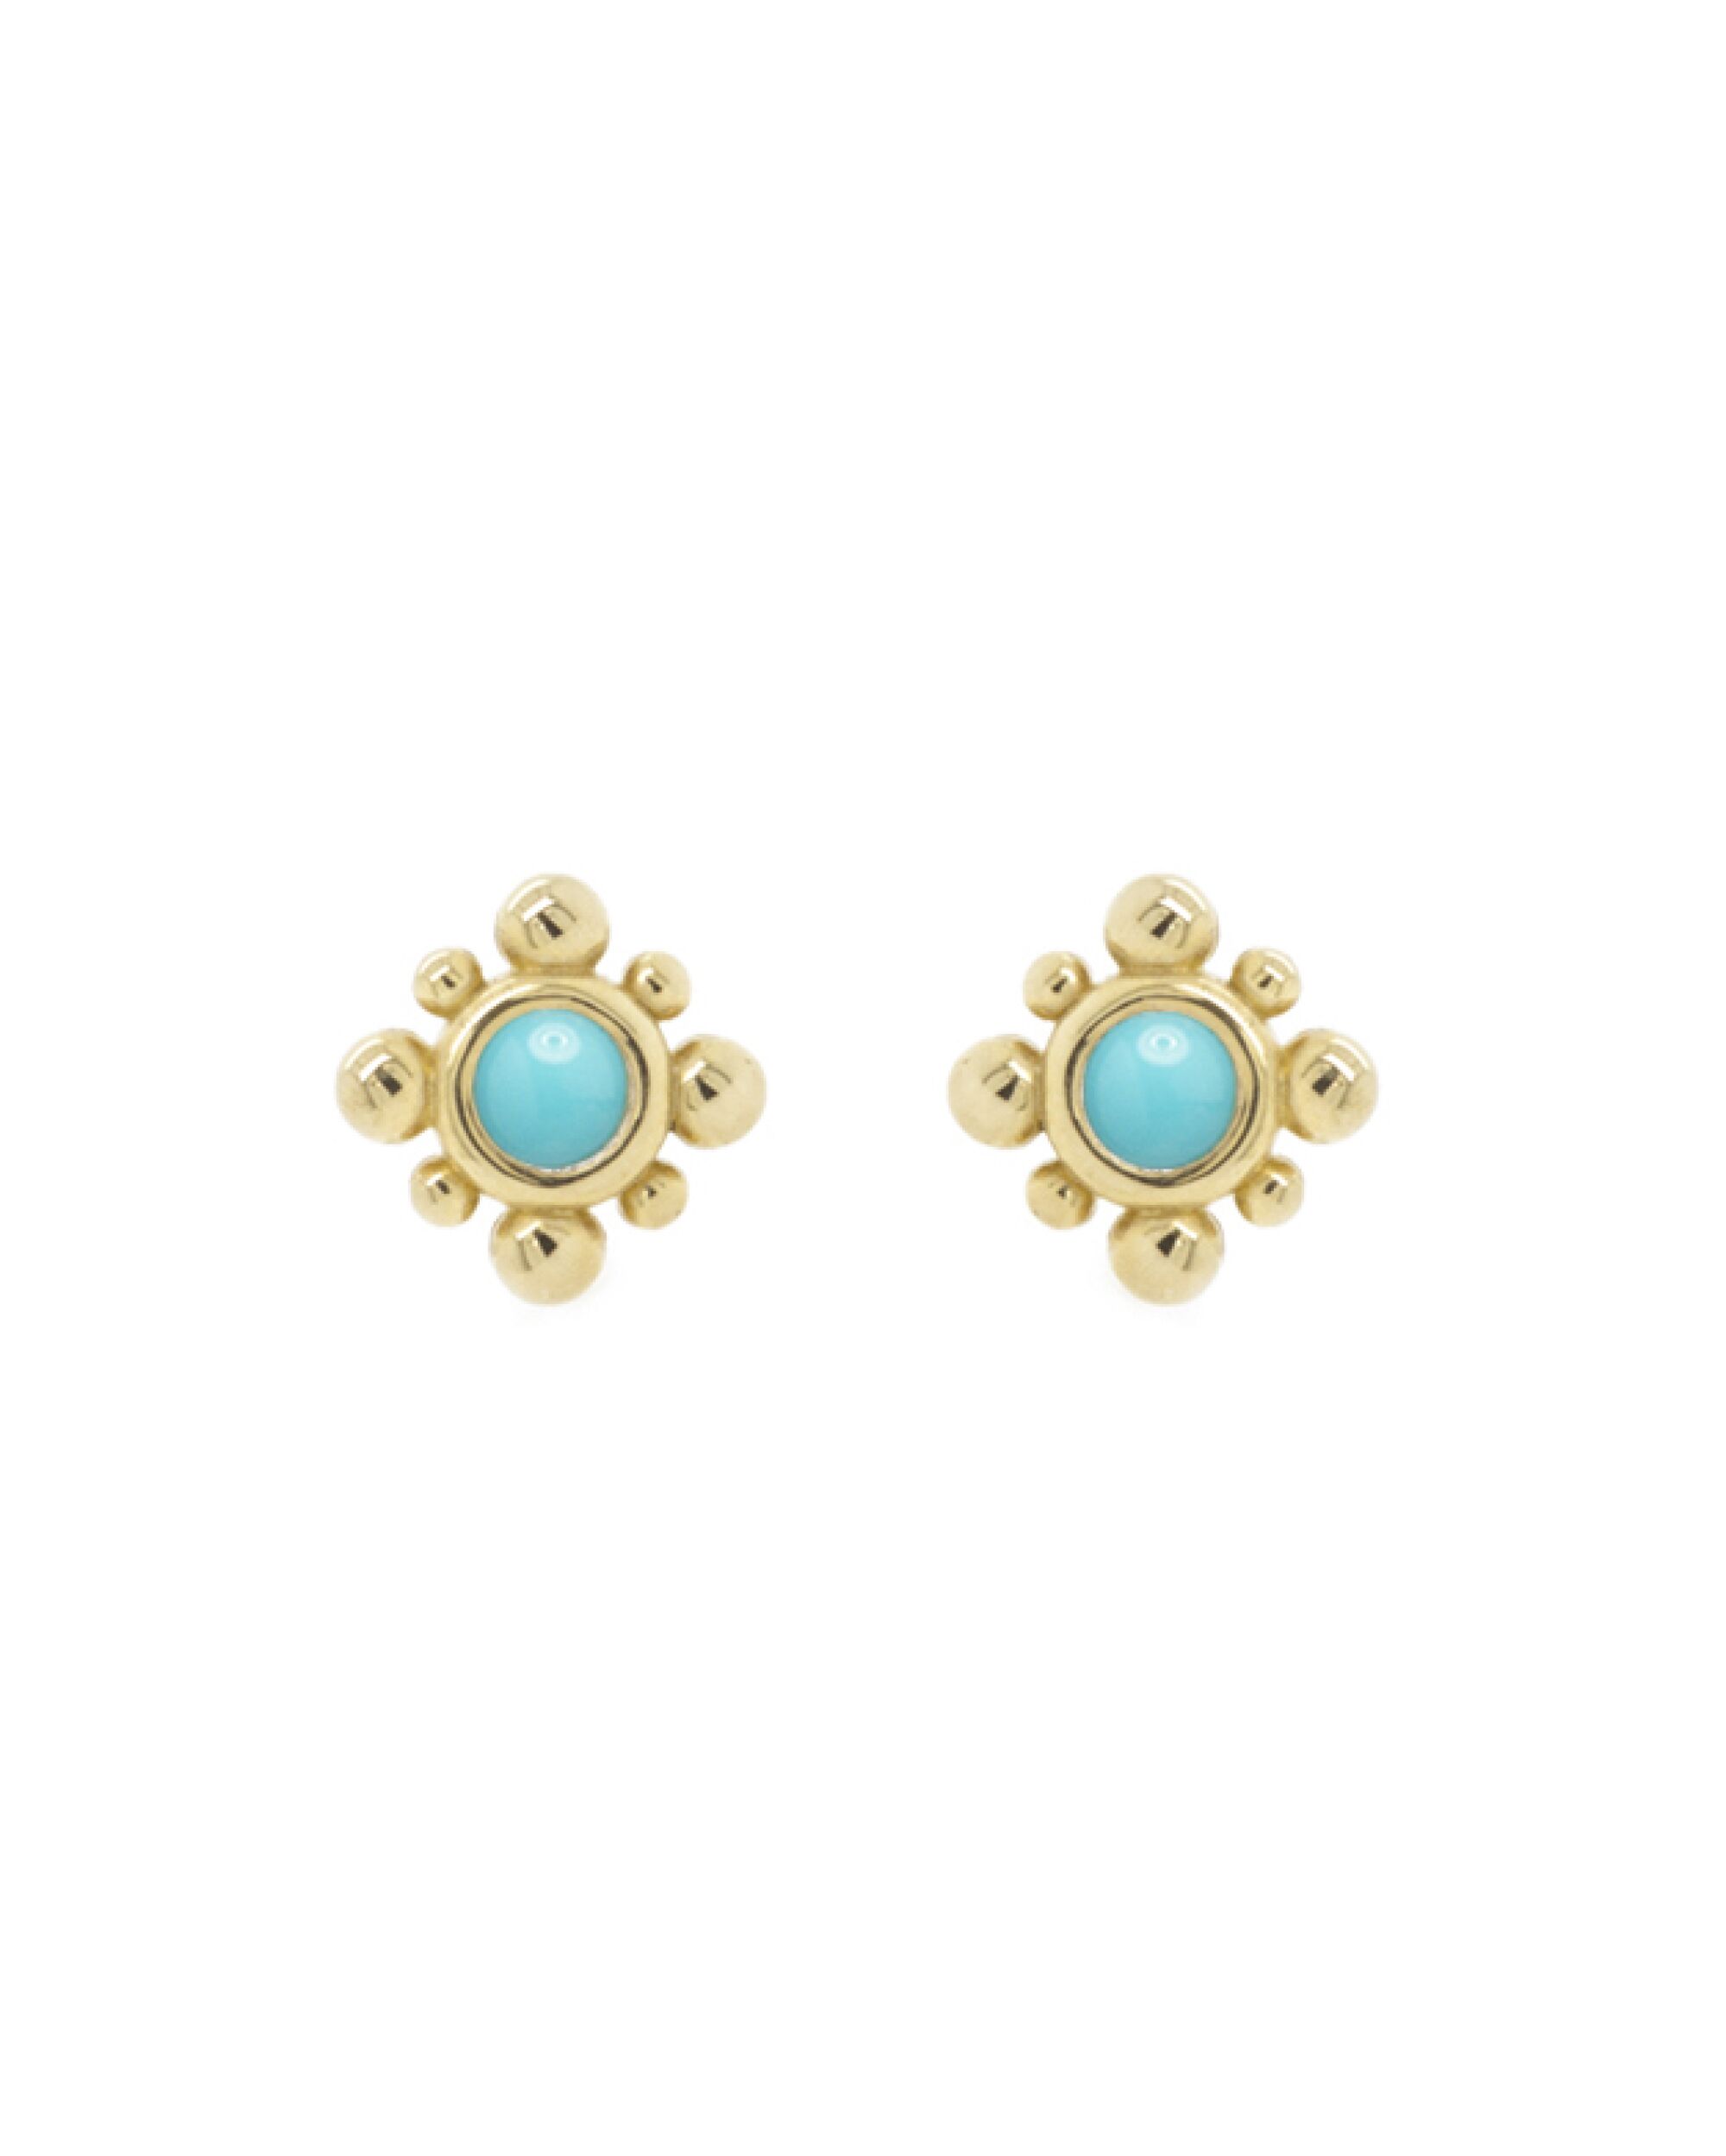 Turquoise earrings from Zoe Chicco